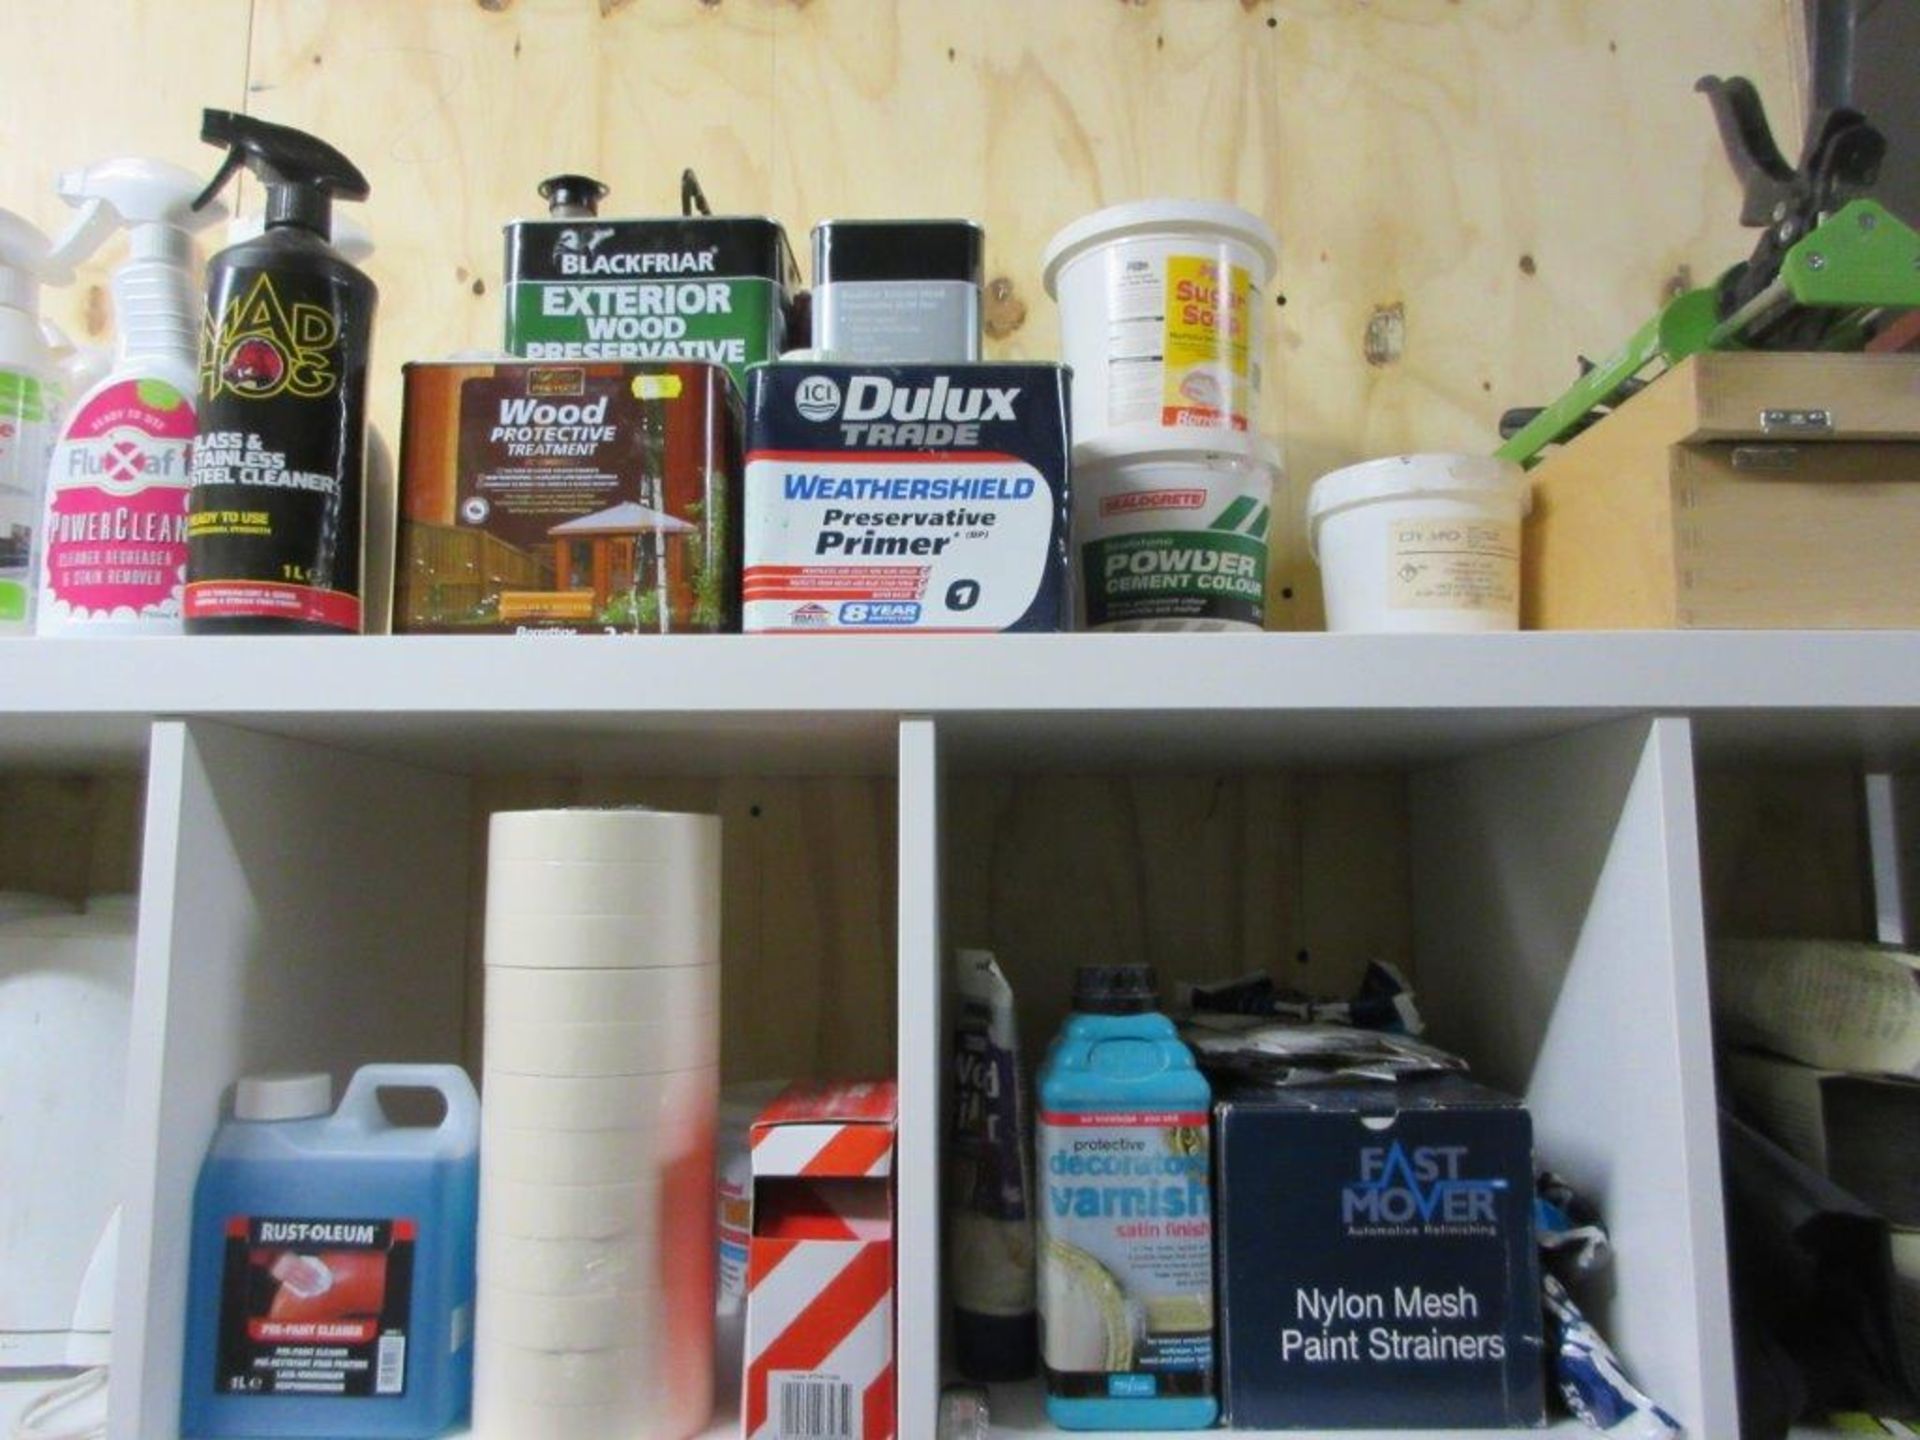 Pigeon hole and wood storage racks c/w contents including sealants, sealant guns, kettles, fire - Image 6 of 9